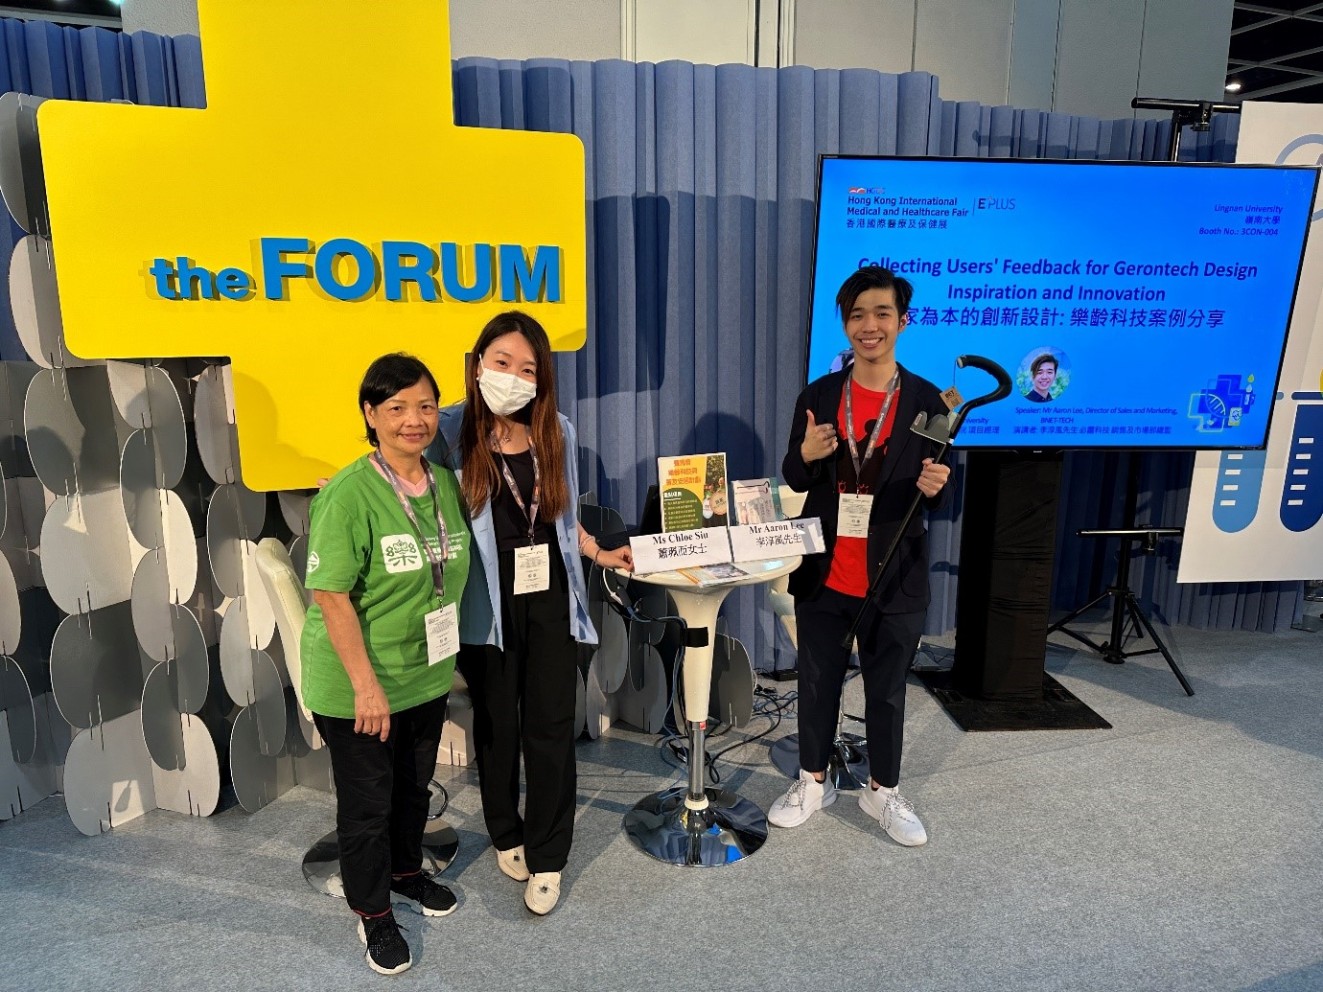 Lingnan University participated in the Medical and Healthcare Fair 2023